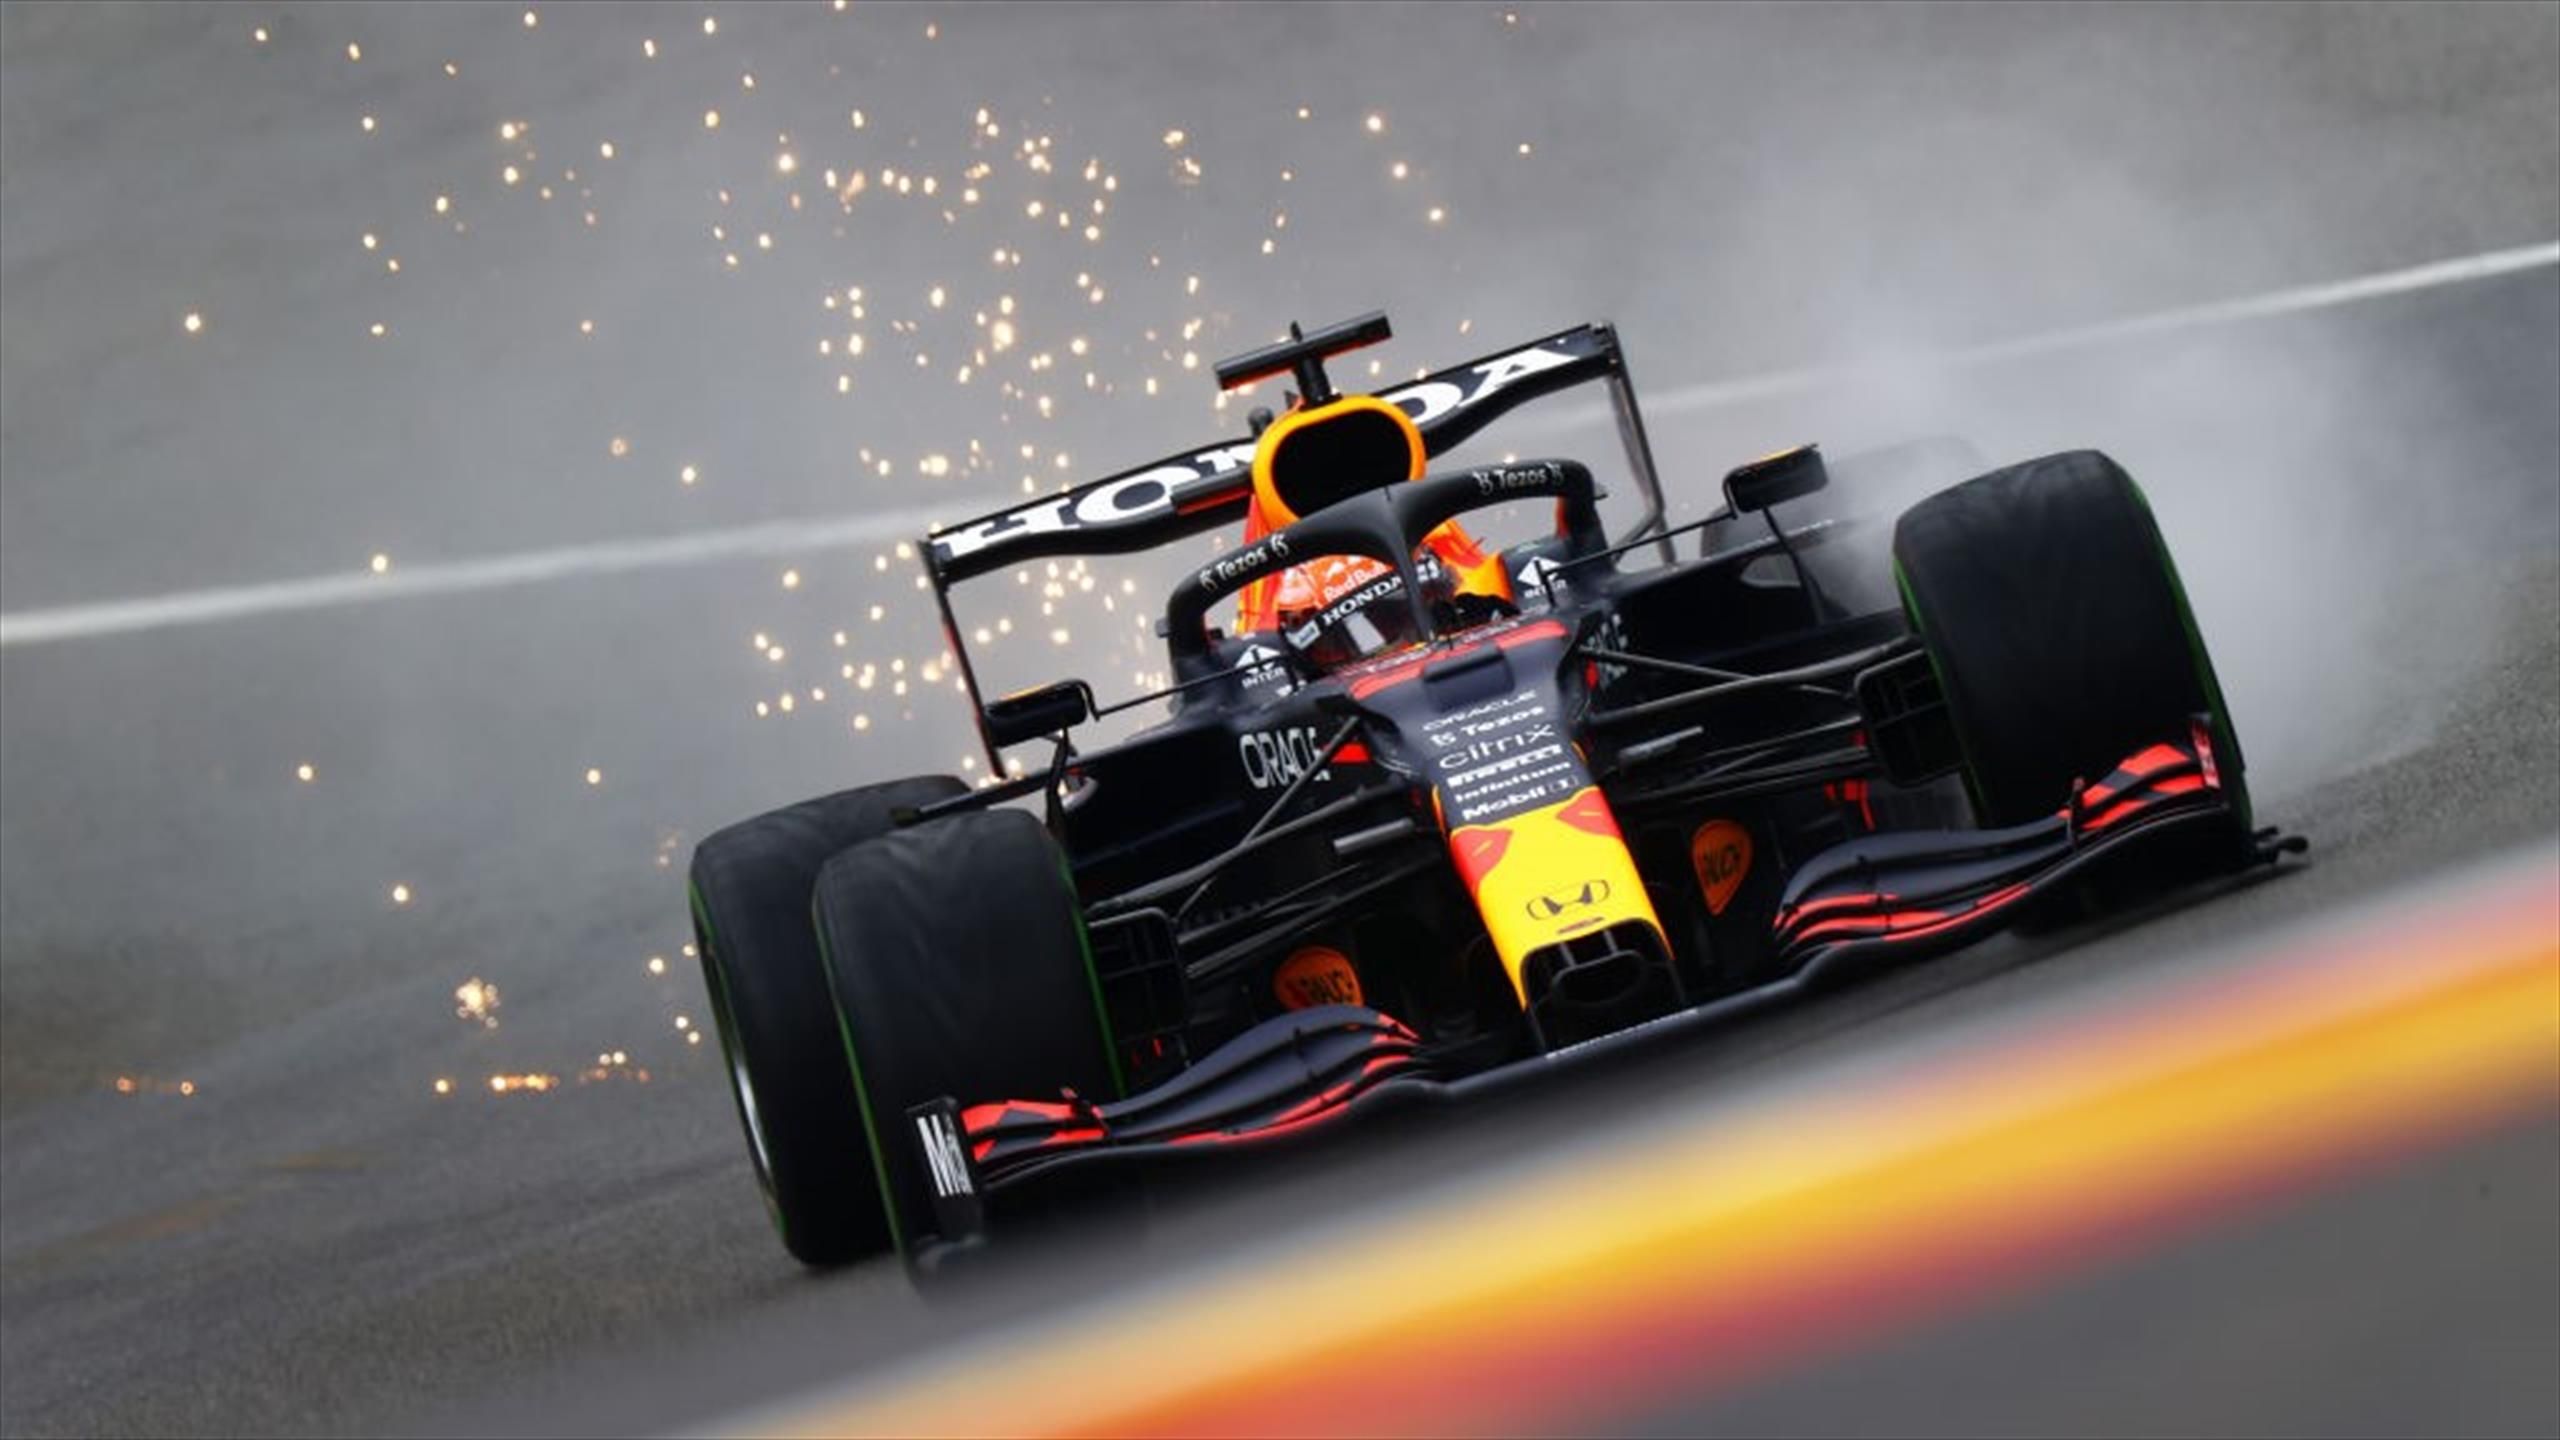 Belgian Grand Prix 2021: Max Verstappen Claims Pole As George Russell Takes Shock Front Row Spot At Spa